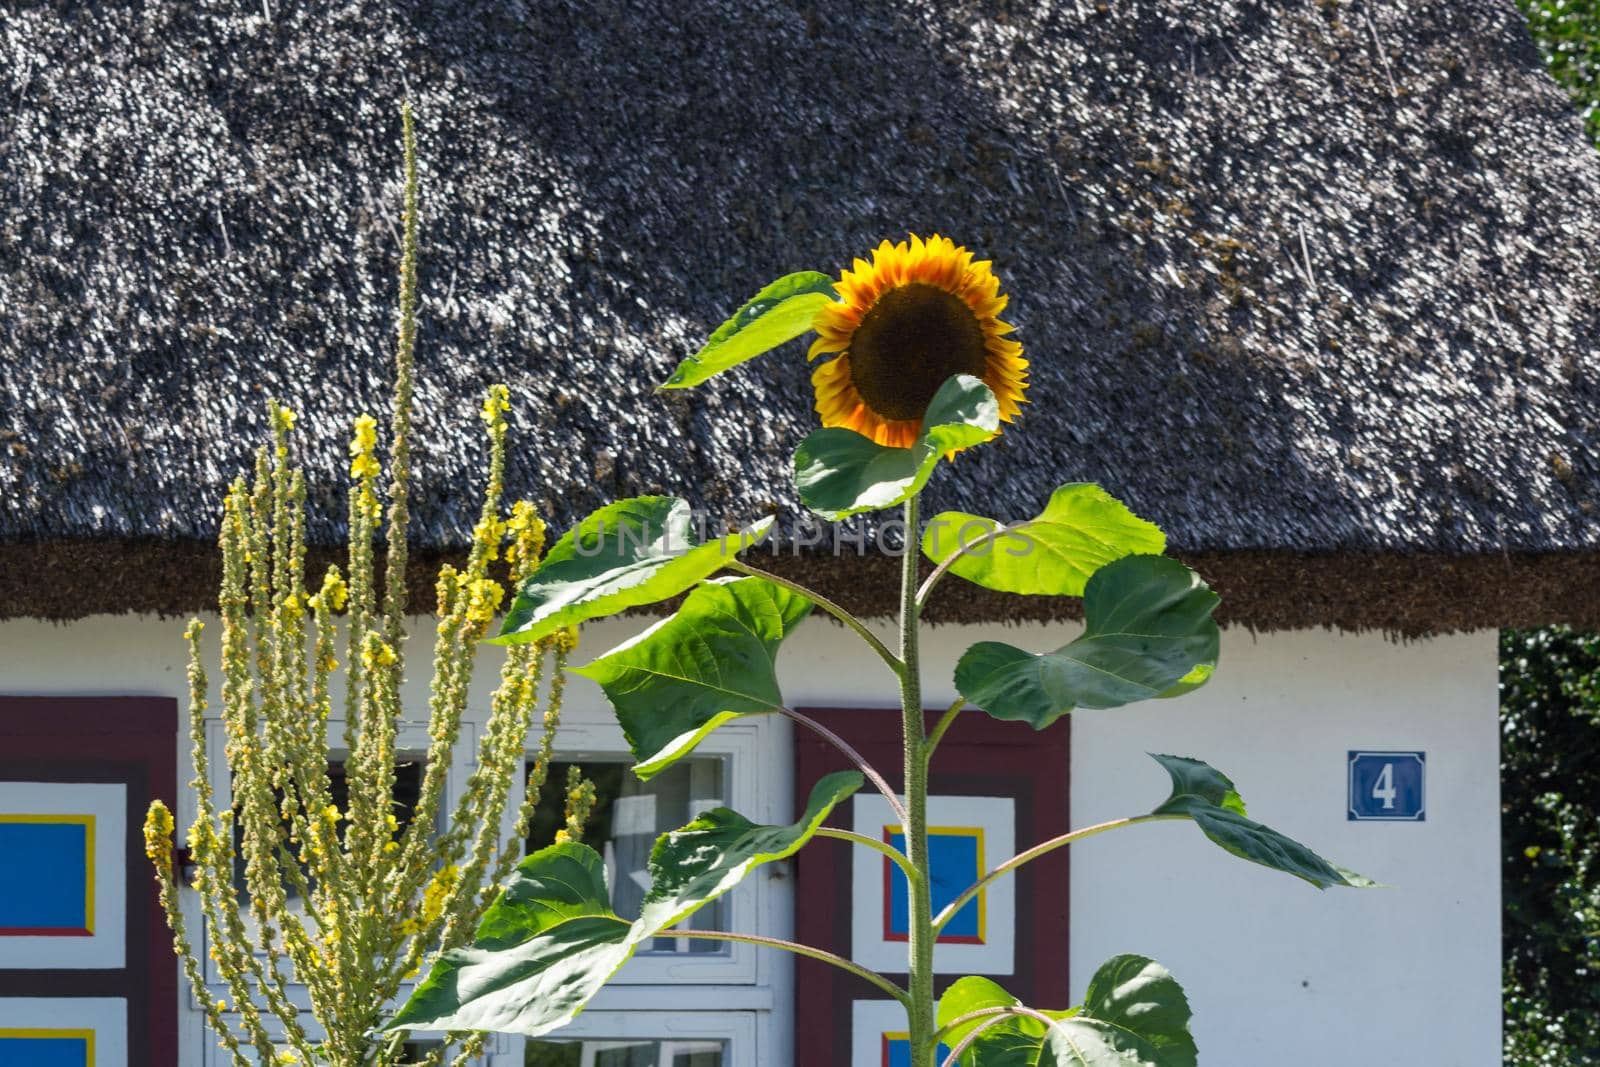 House on the peninsula Fischland-Darß-Zingst, Baltic Sea, Germany with sunflowers in the foreground